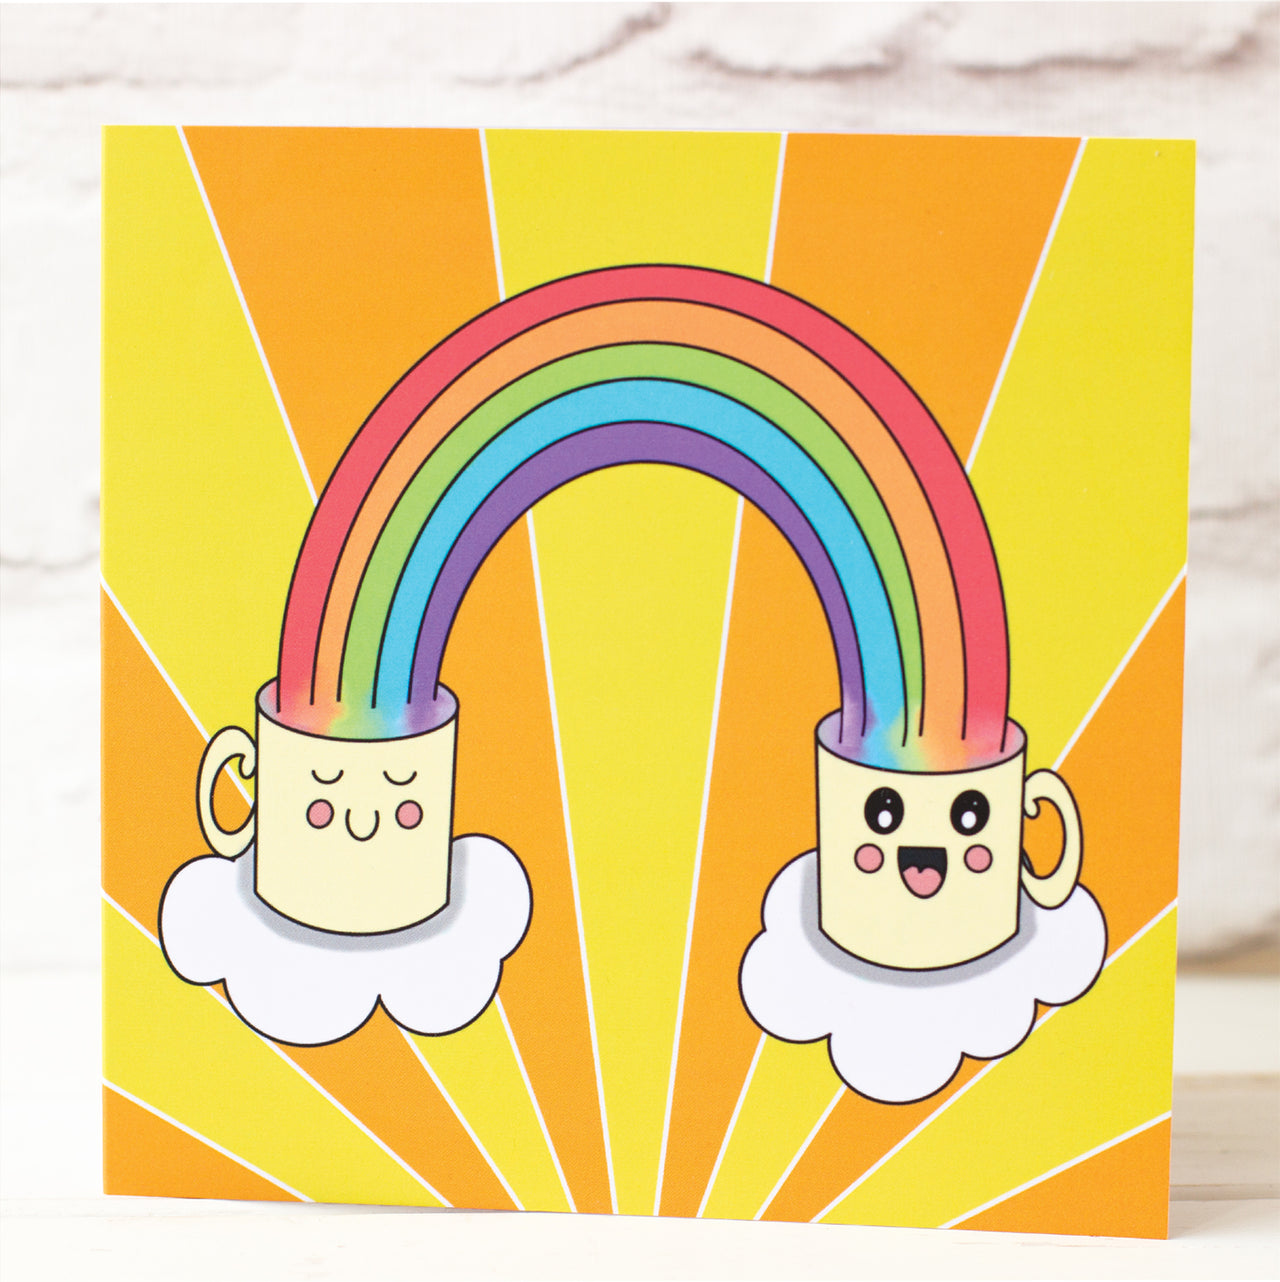 Send a Smile. Happy, Cute Mugs and Rainbows Greeting Card.